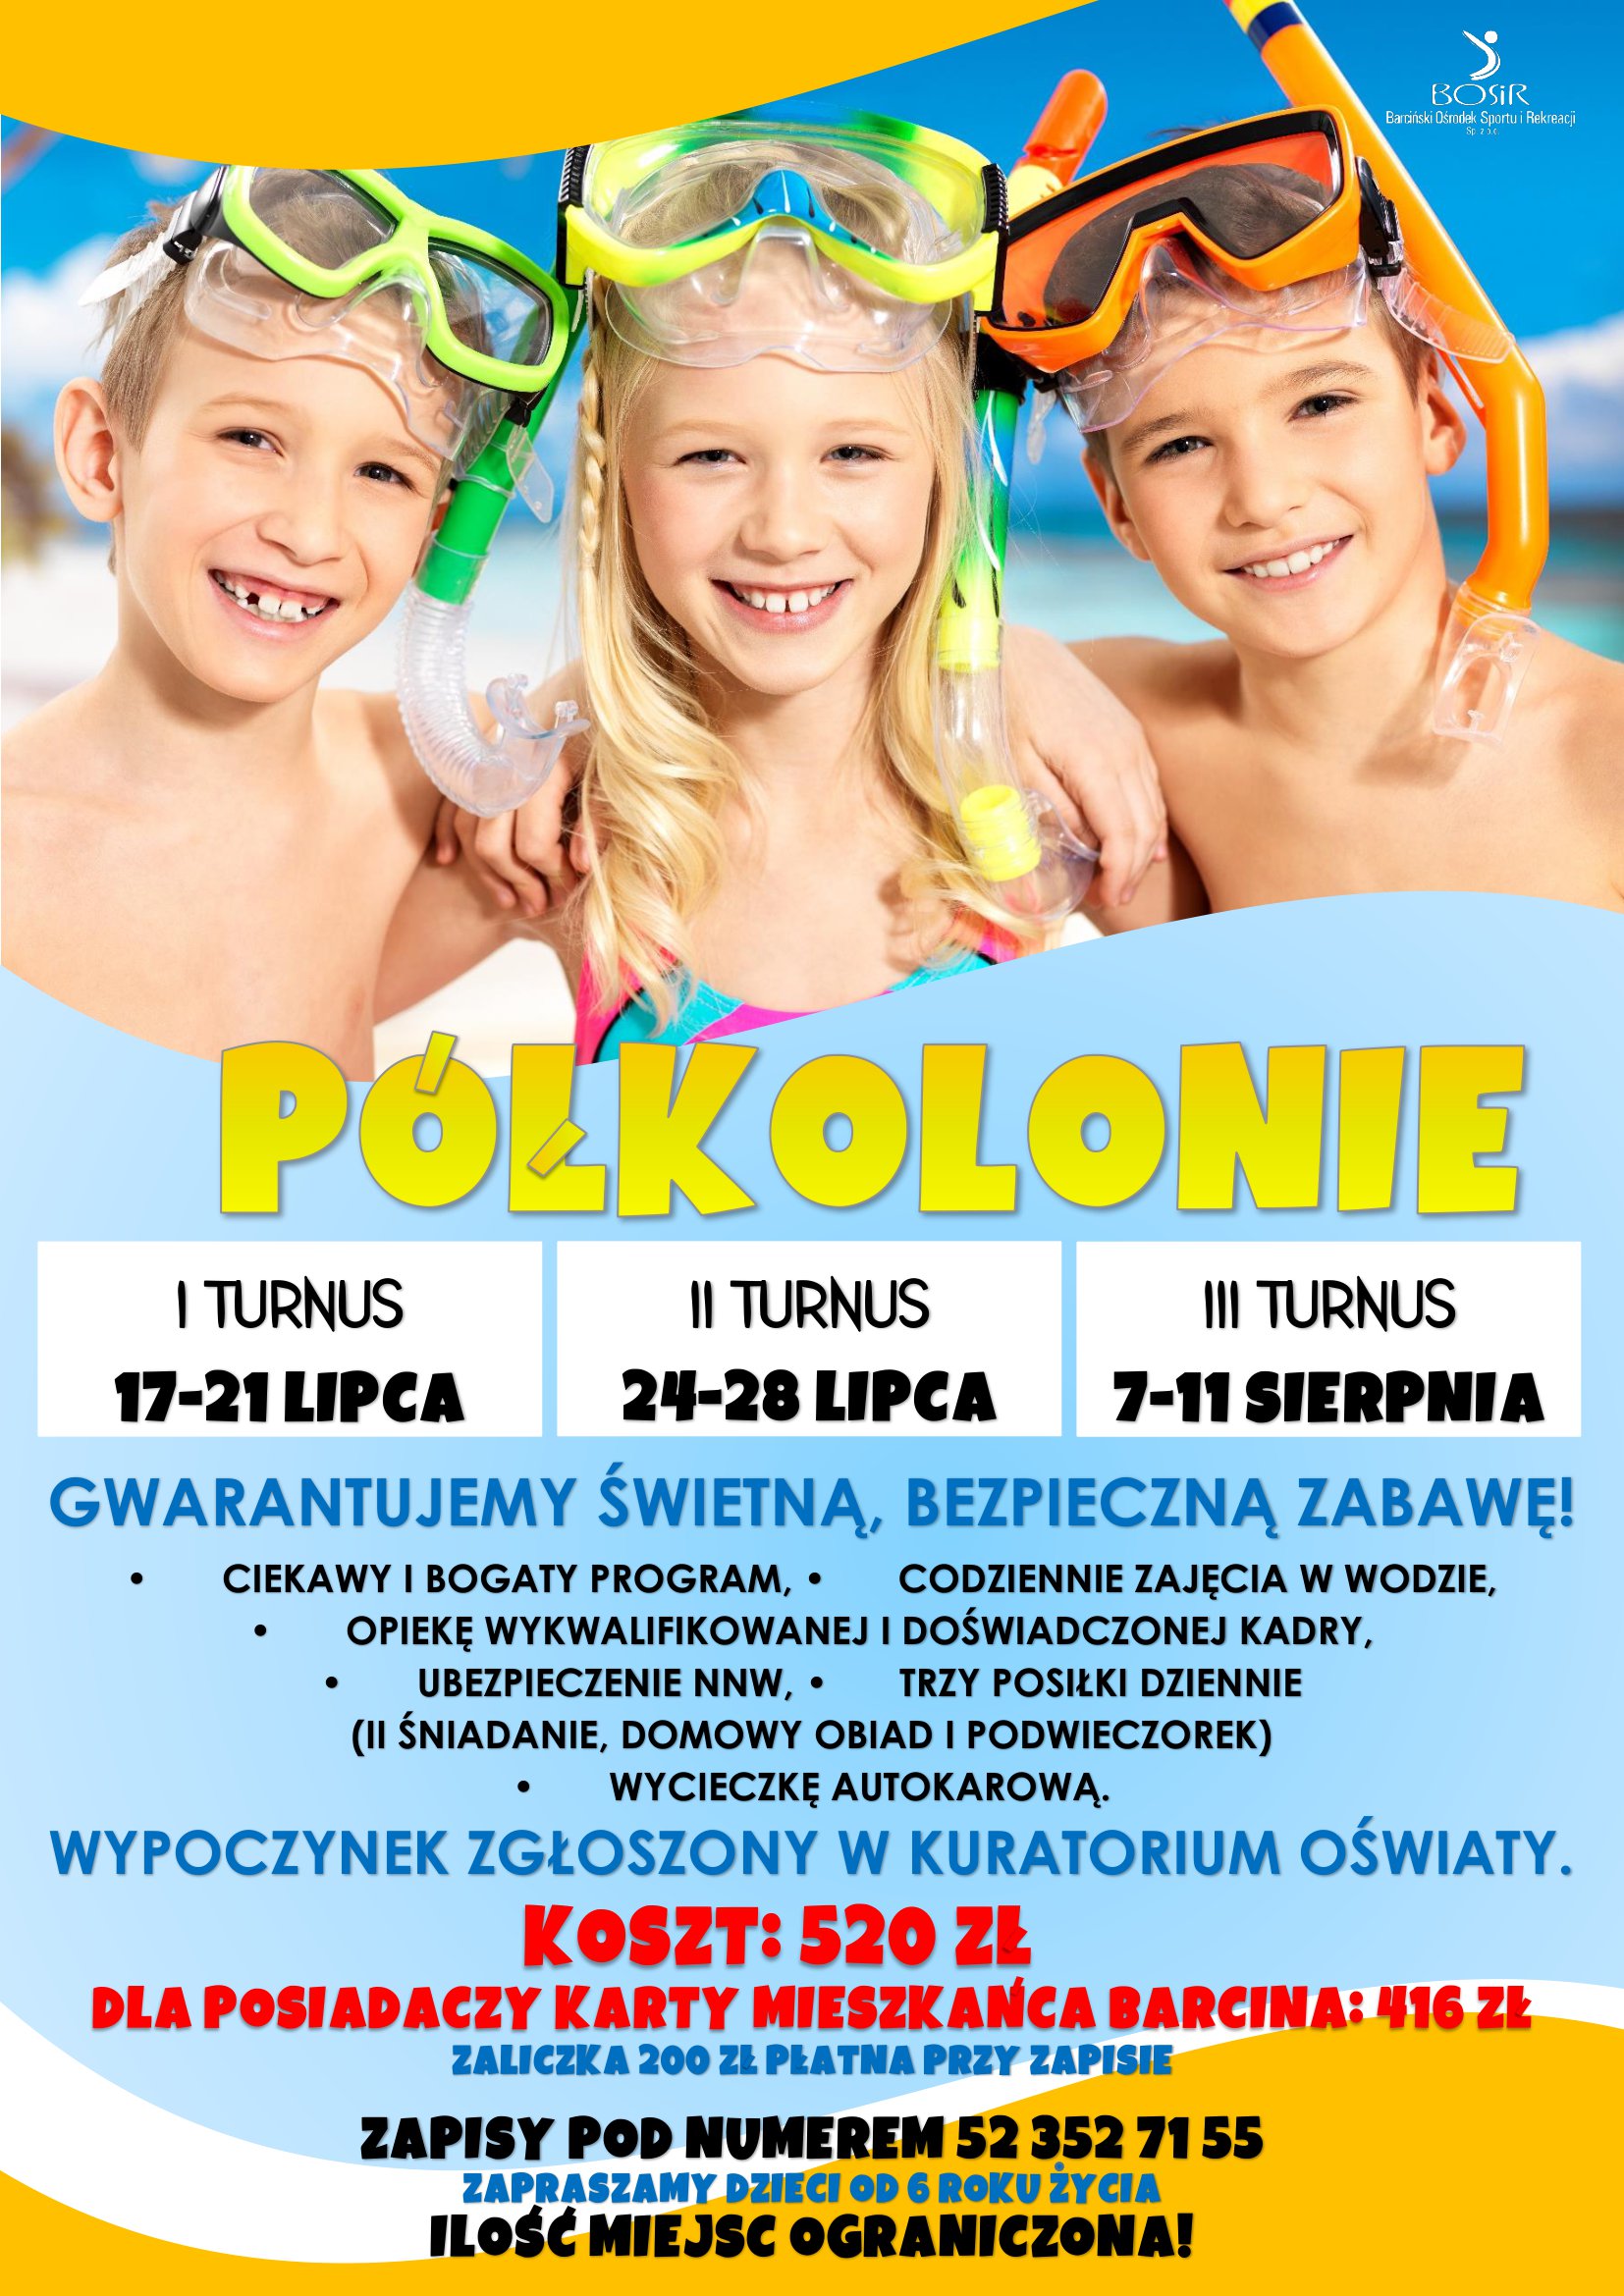 You are currently viewing Półkolonie na basenie.